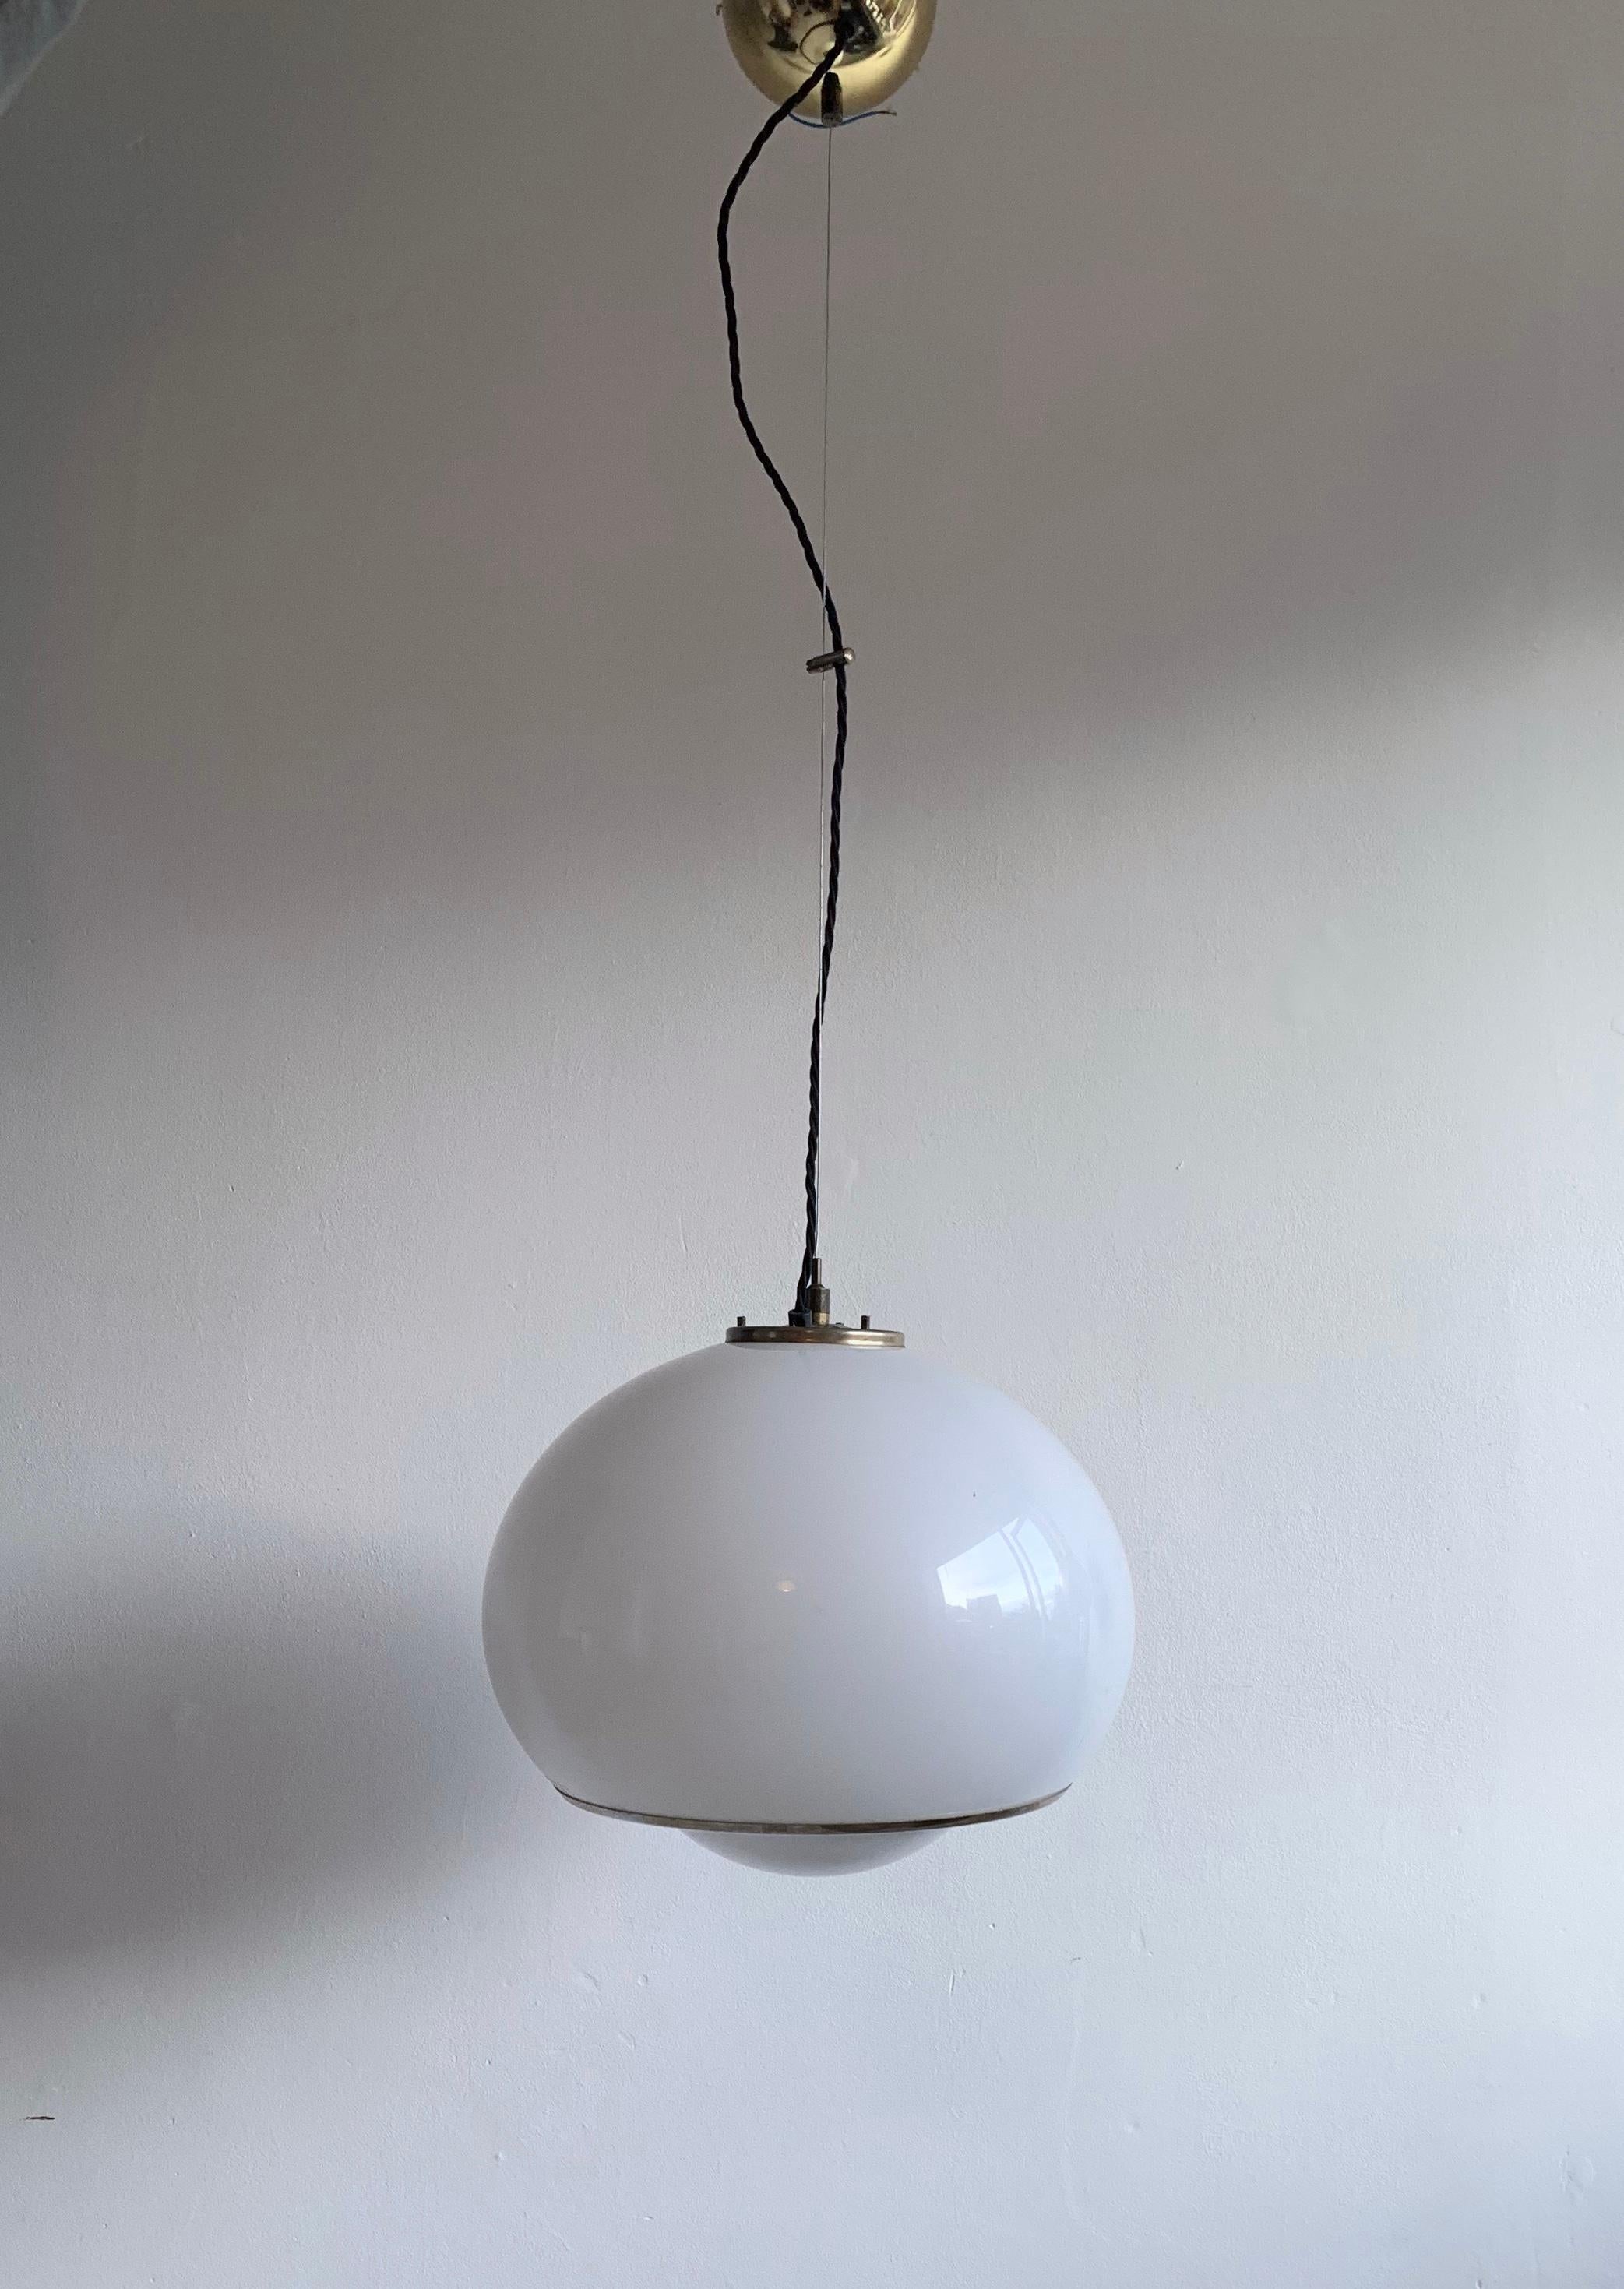 Midcentury Plastic and Brass 'Bud' Pendant Lamp by Guzzini for Meblo, circa 1970 In Good Condition For Sale In London, GB